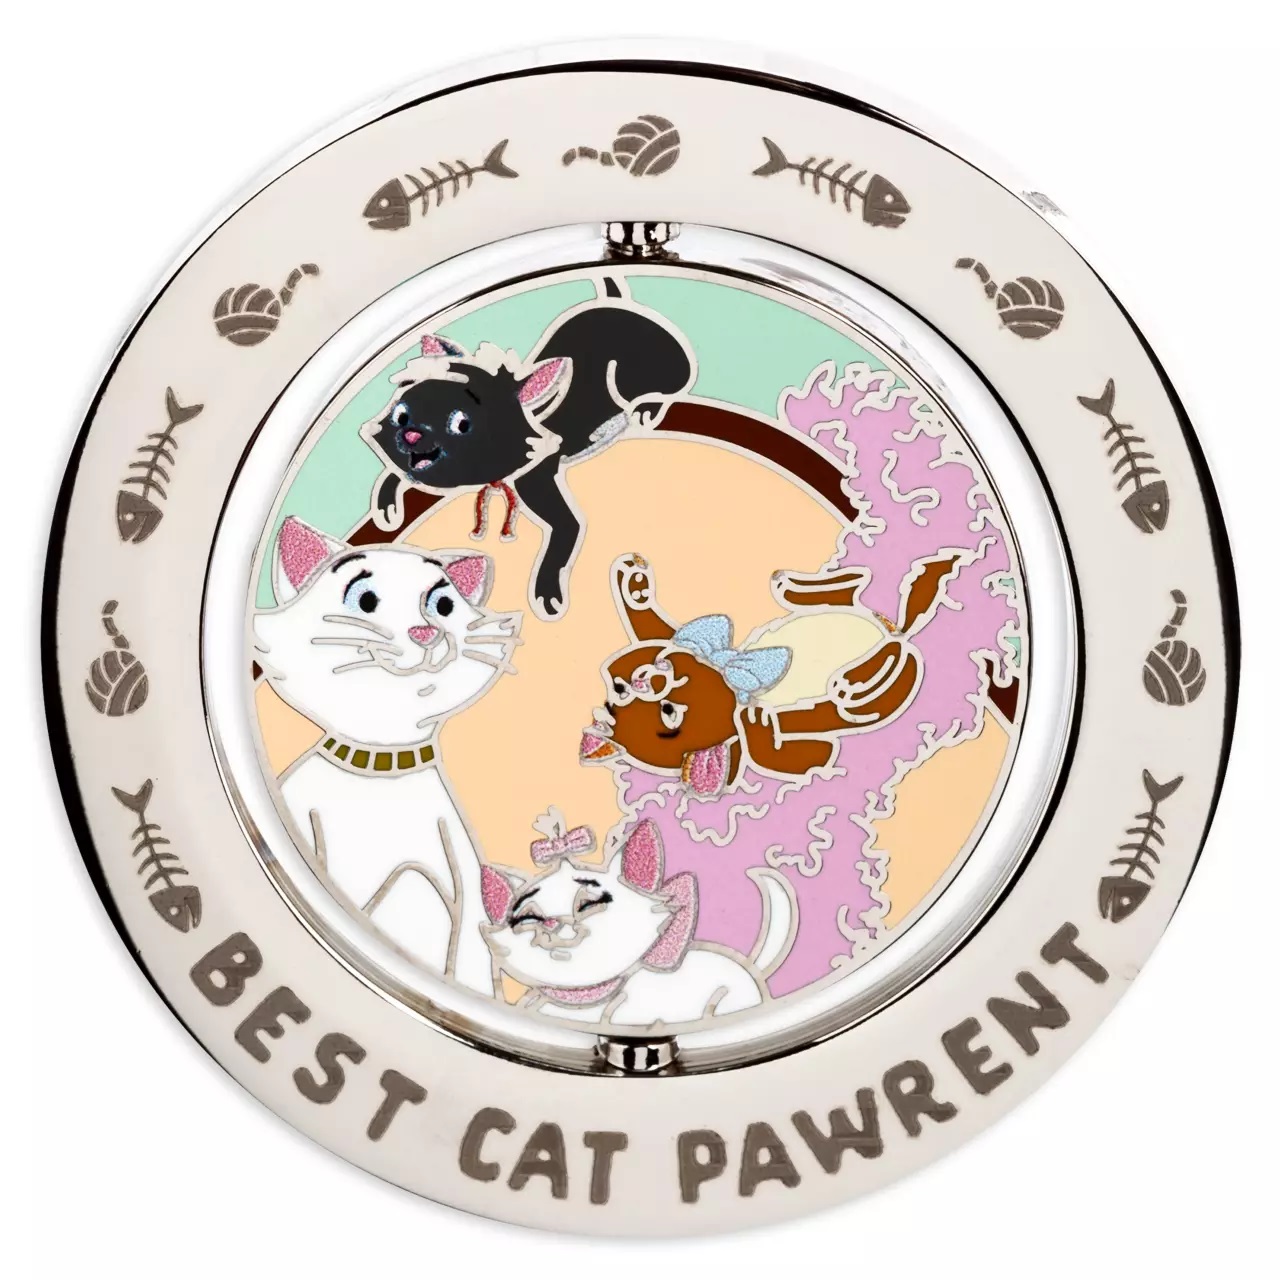 Madame Adelaide Bonfamille, Duchess and Kittens ''Best Cat Pawrent'' Spinning Pin – The Aristocats - 1